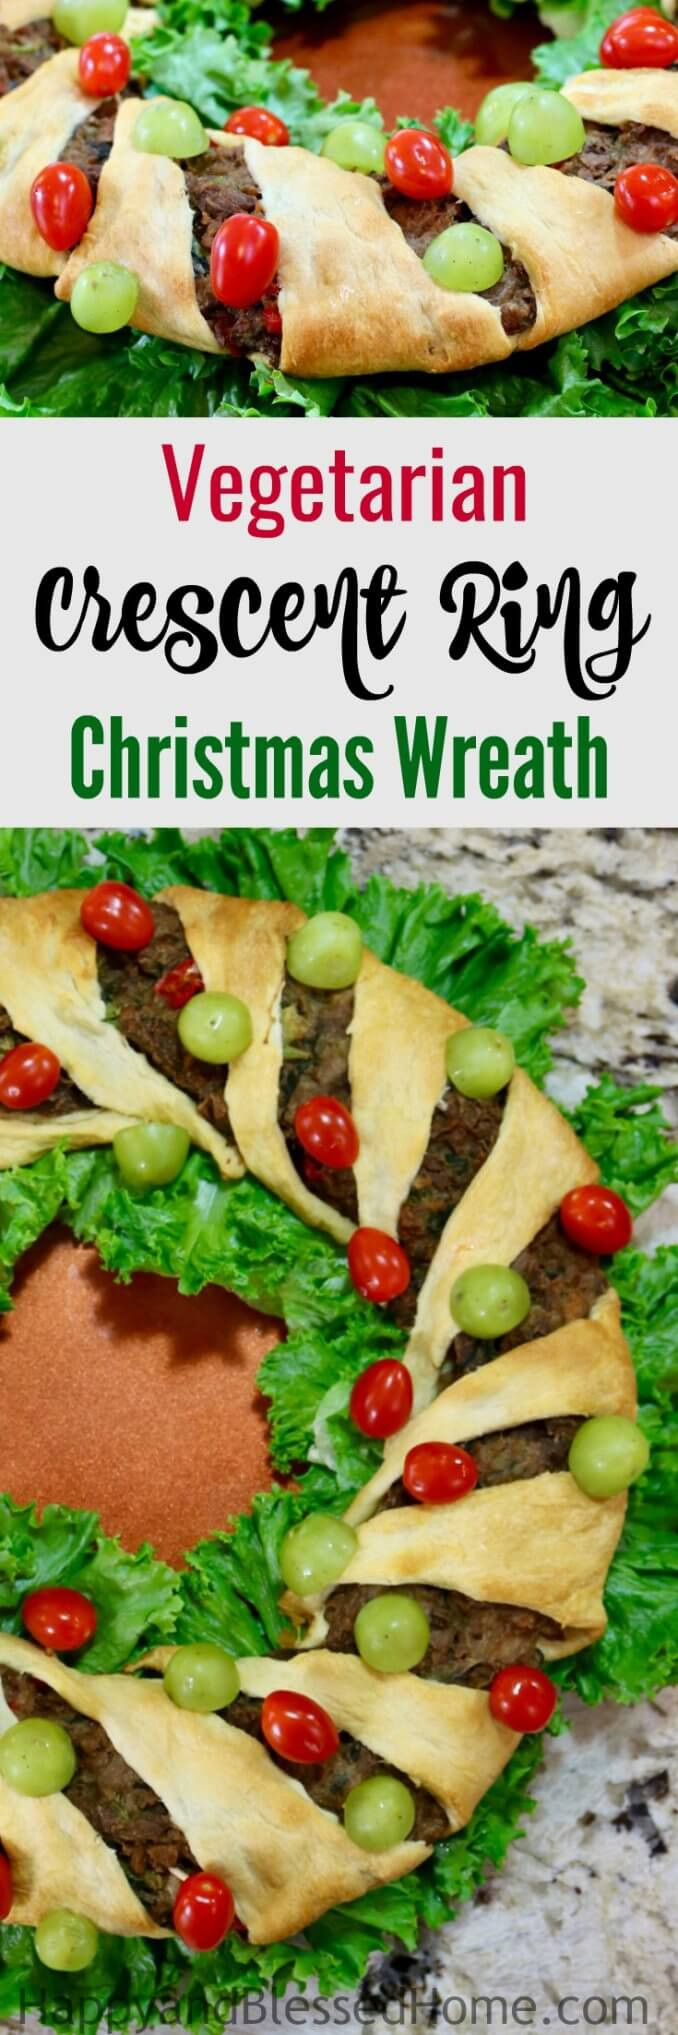 Vegan Christmas Appetizers
 Easy Ve arian Crescent Ring Recipe and Party Appetizer